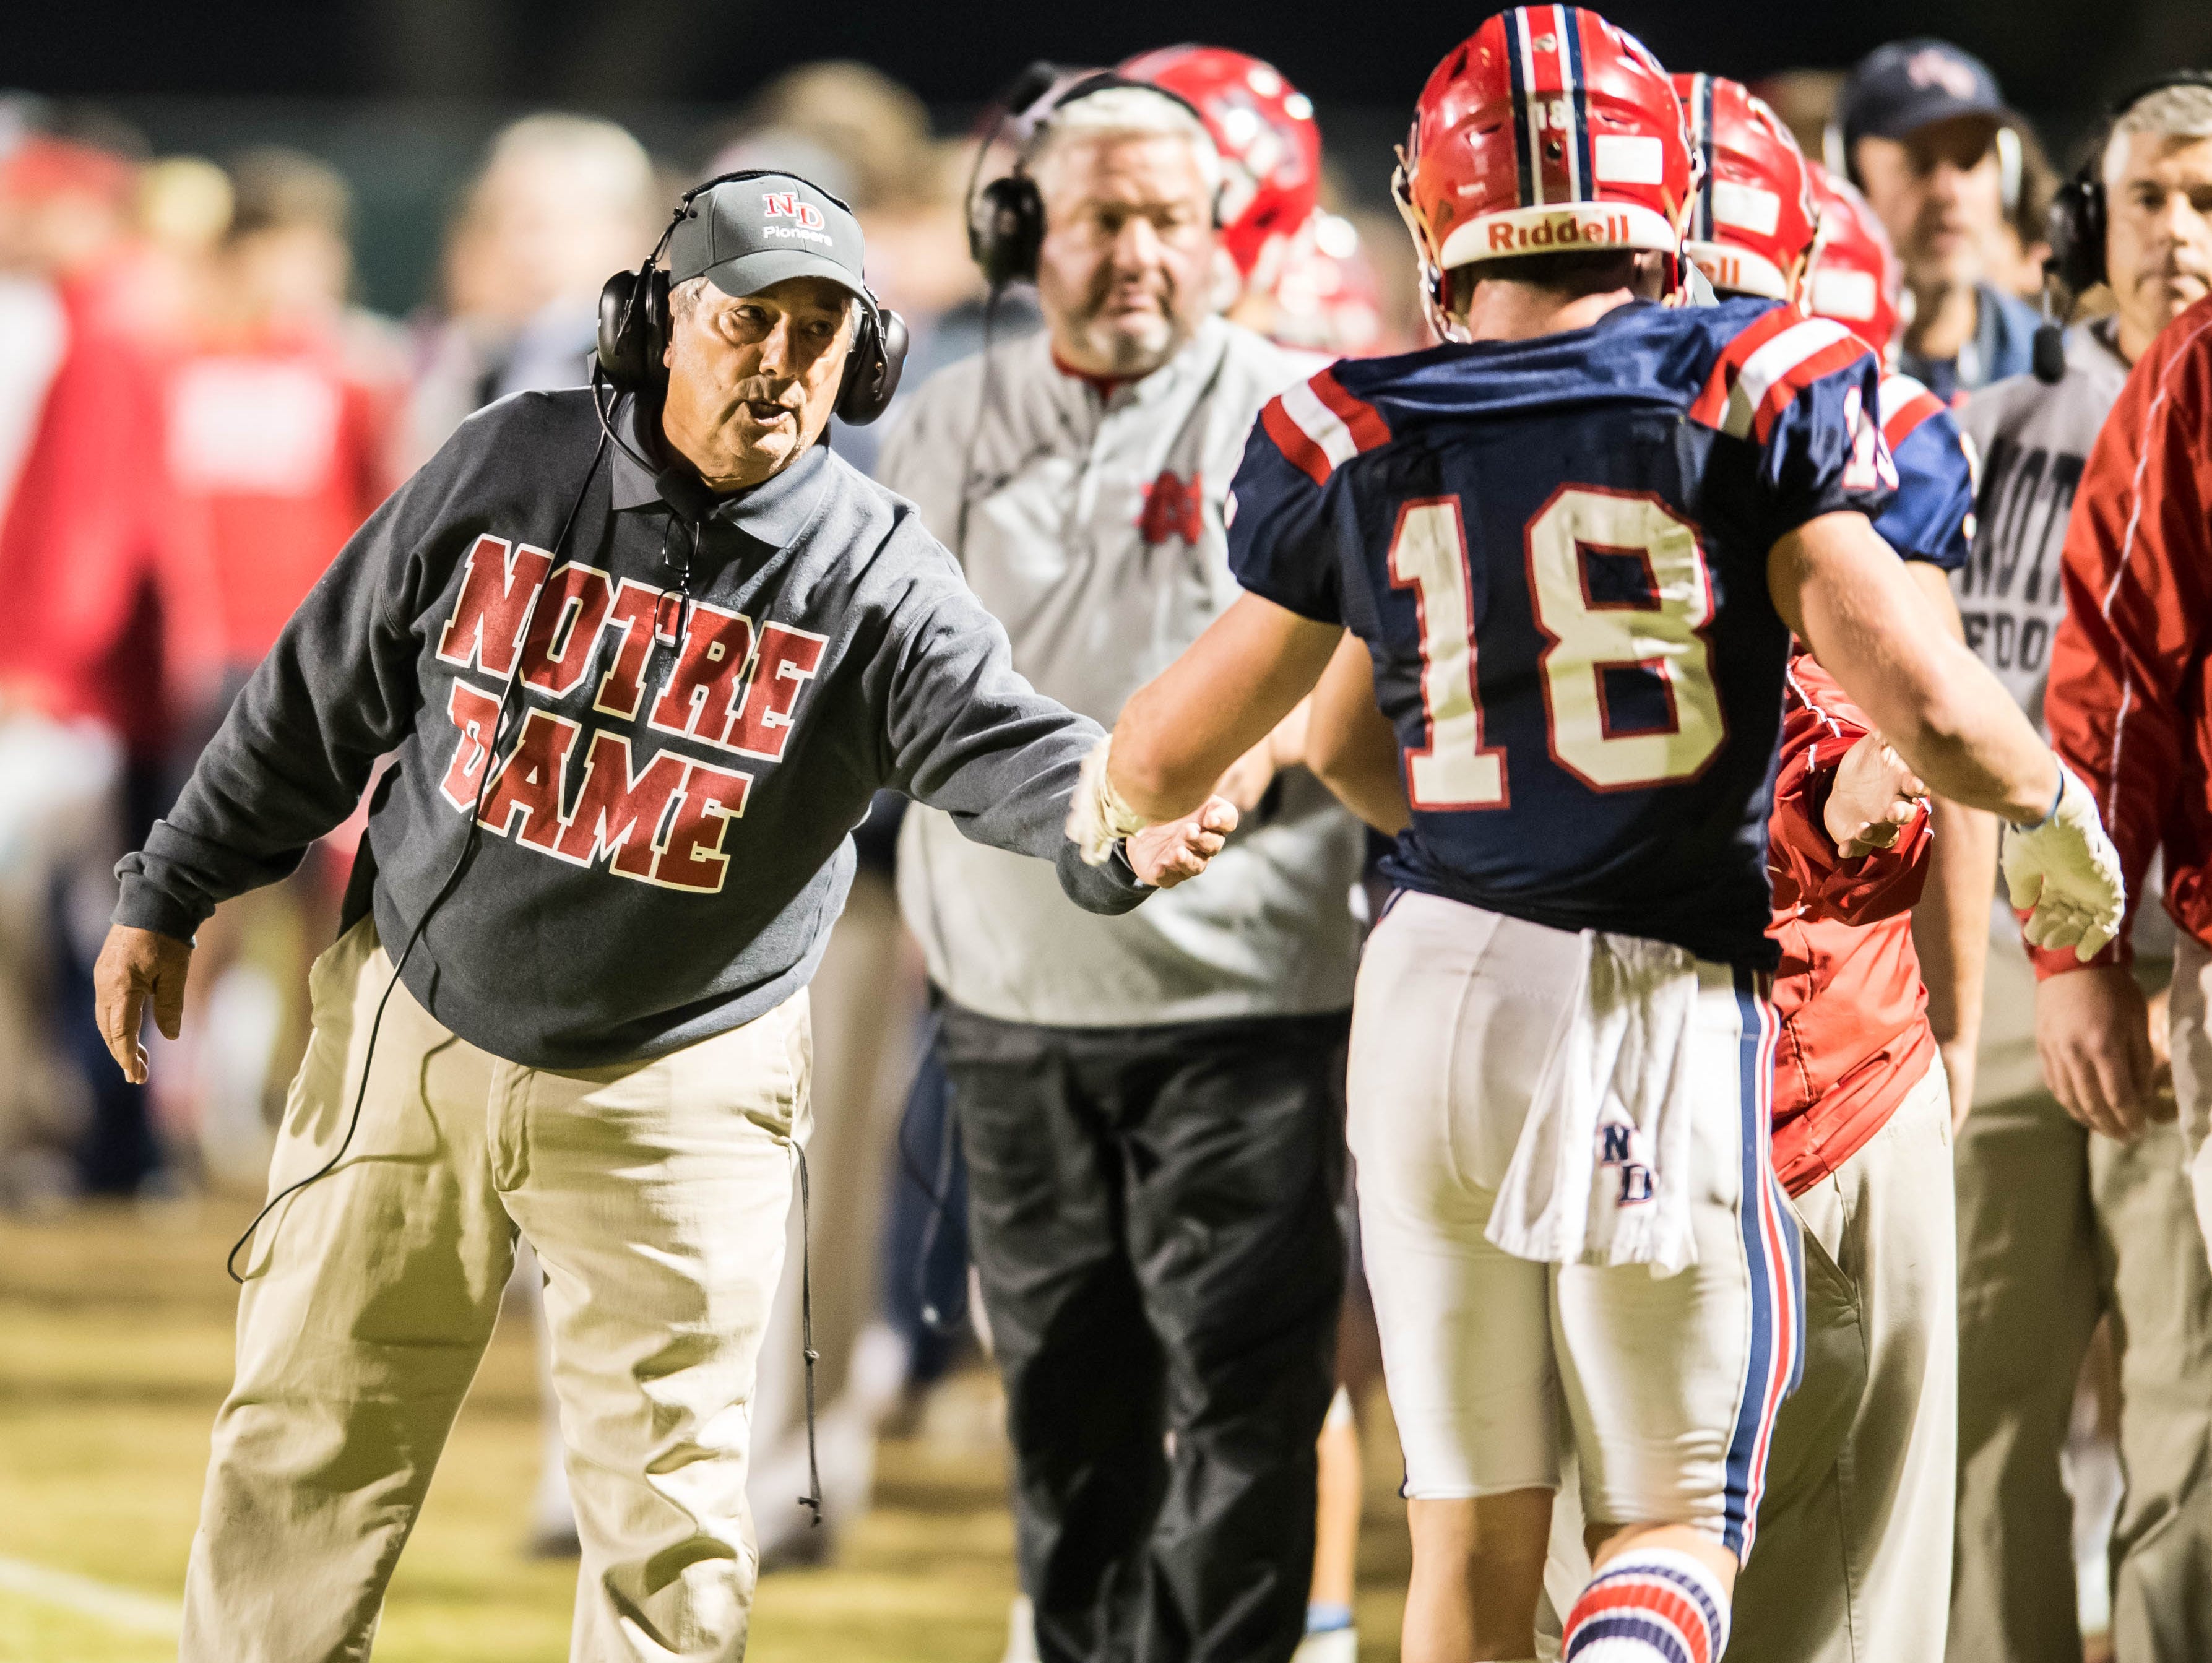 Notre Dame head coach Lewis Cook congratulates Hayden Bourgeois (18) after he scores another Pios touchdown as Notre Dame goes on to defeat Calvary Baptist by a score of 28-7 in the LHSAA Division III quarter finals playoff game in Crowley La. at Gardiner Memorial Stadium on Friday night Nov. 20, 2015.